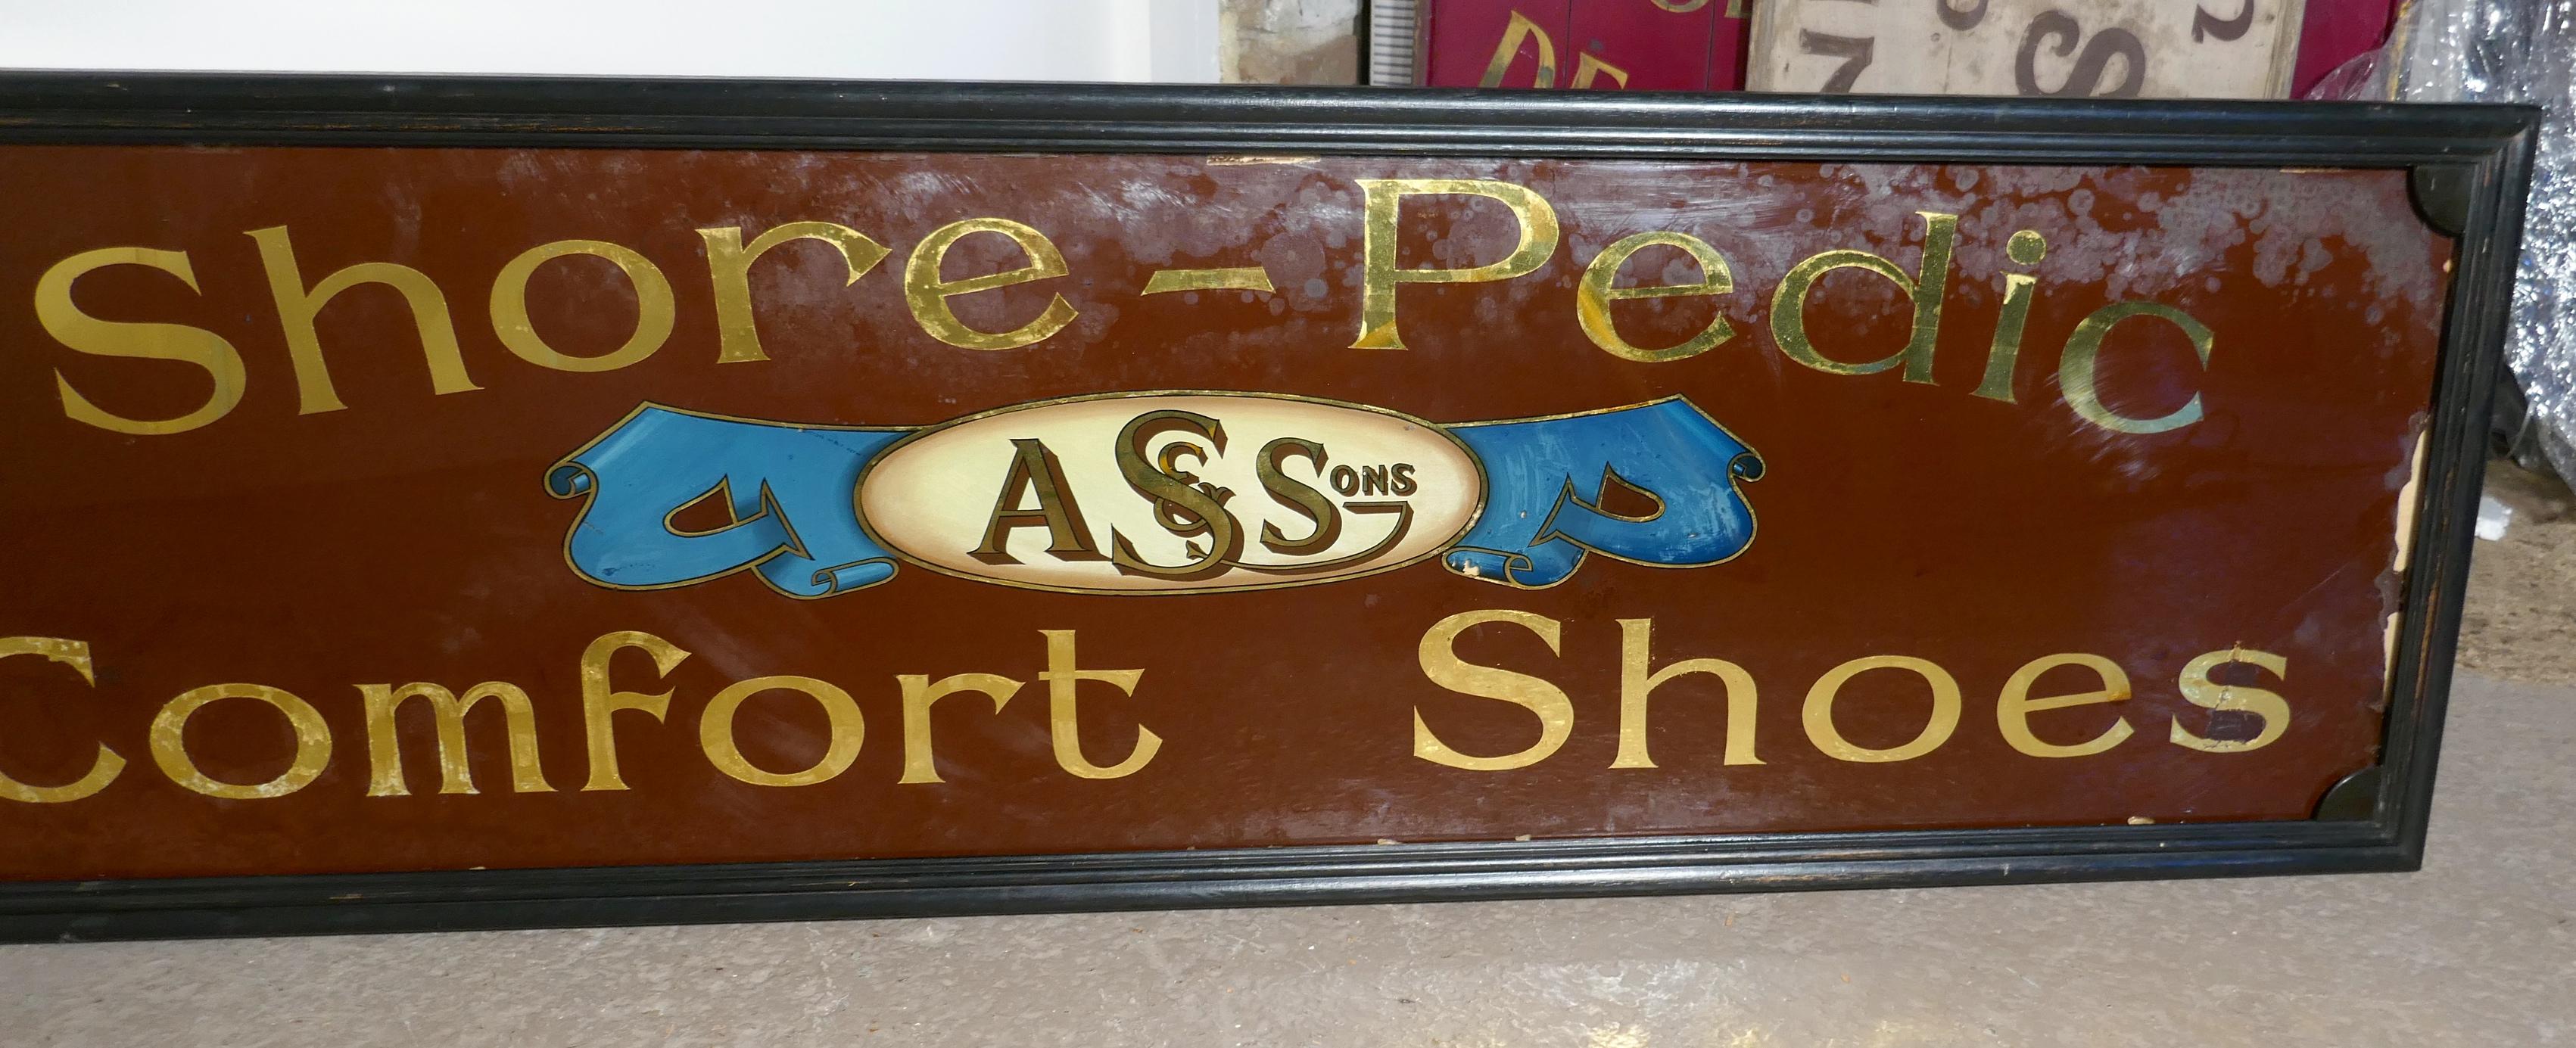 20th Century Shoe Shop Mirror Advertising Sign, A S & Sons Shore Pedic Shoes For Sale